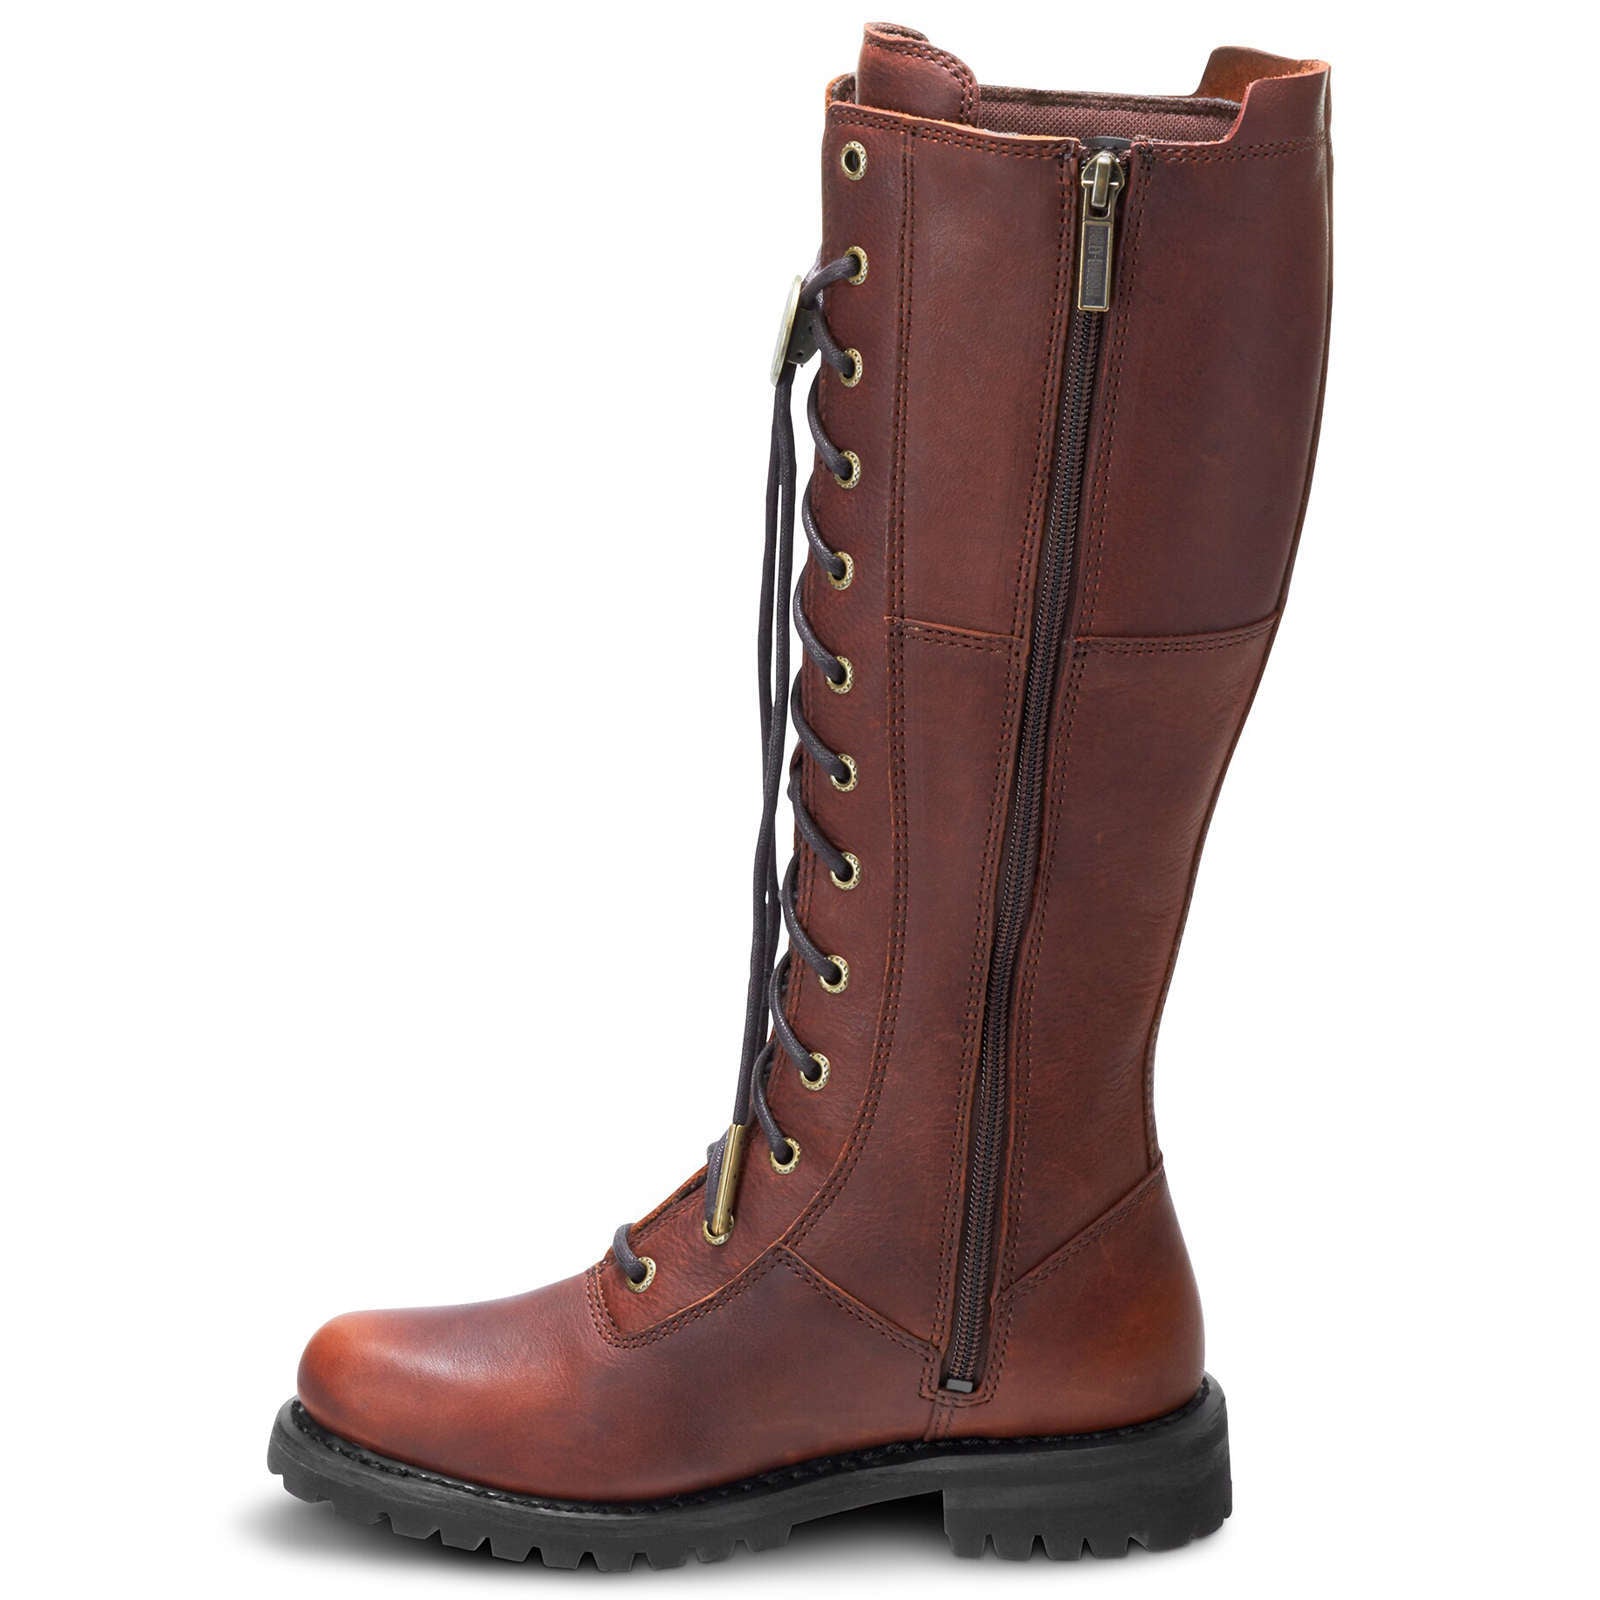 Harley Davidson Walfield Full Grain Leather Women's Knee High Riding Boots#color_rust